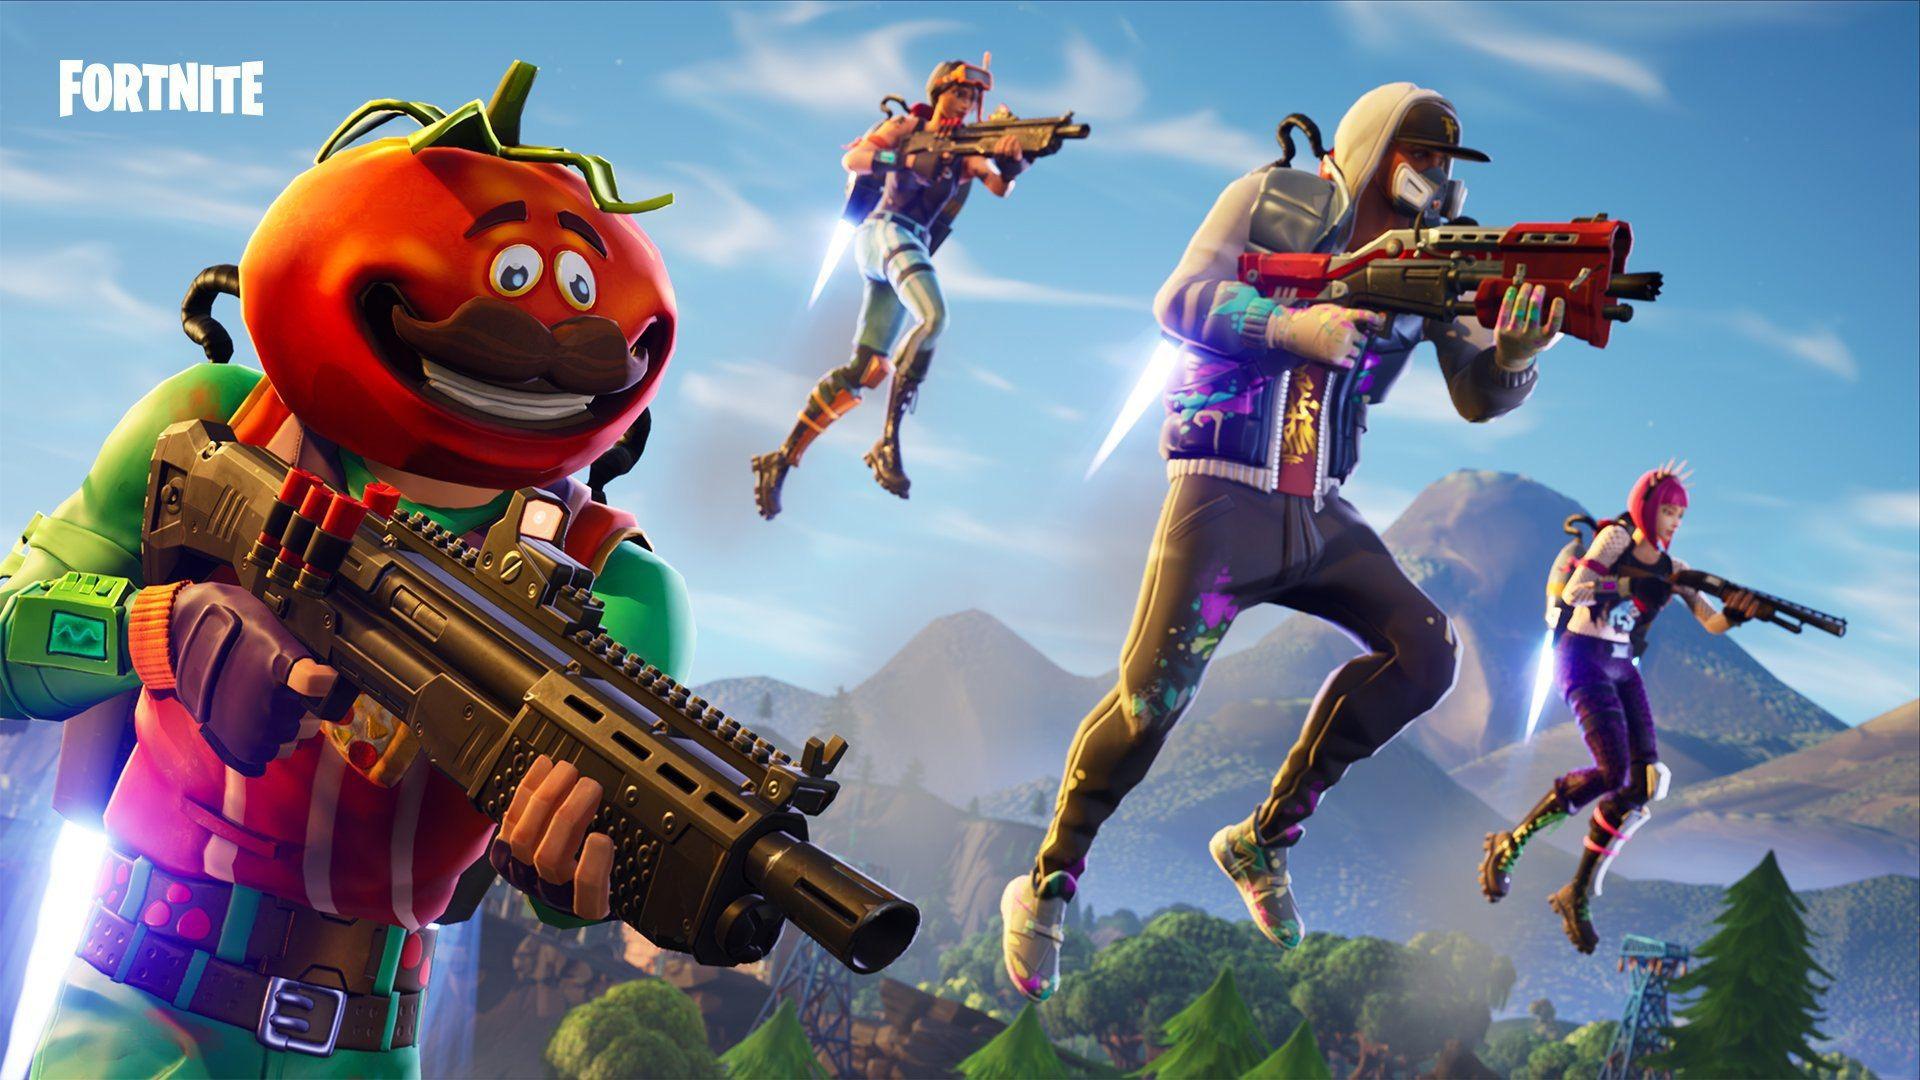 How Fortnite challenges could change for the better in season 9